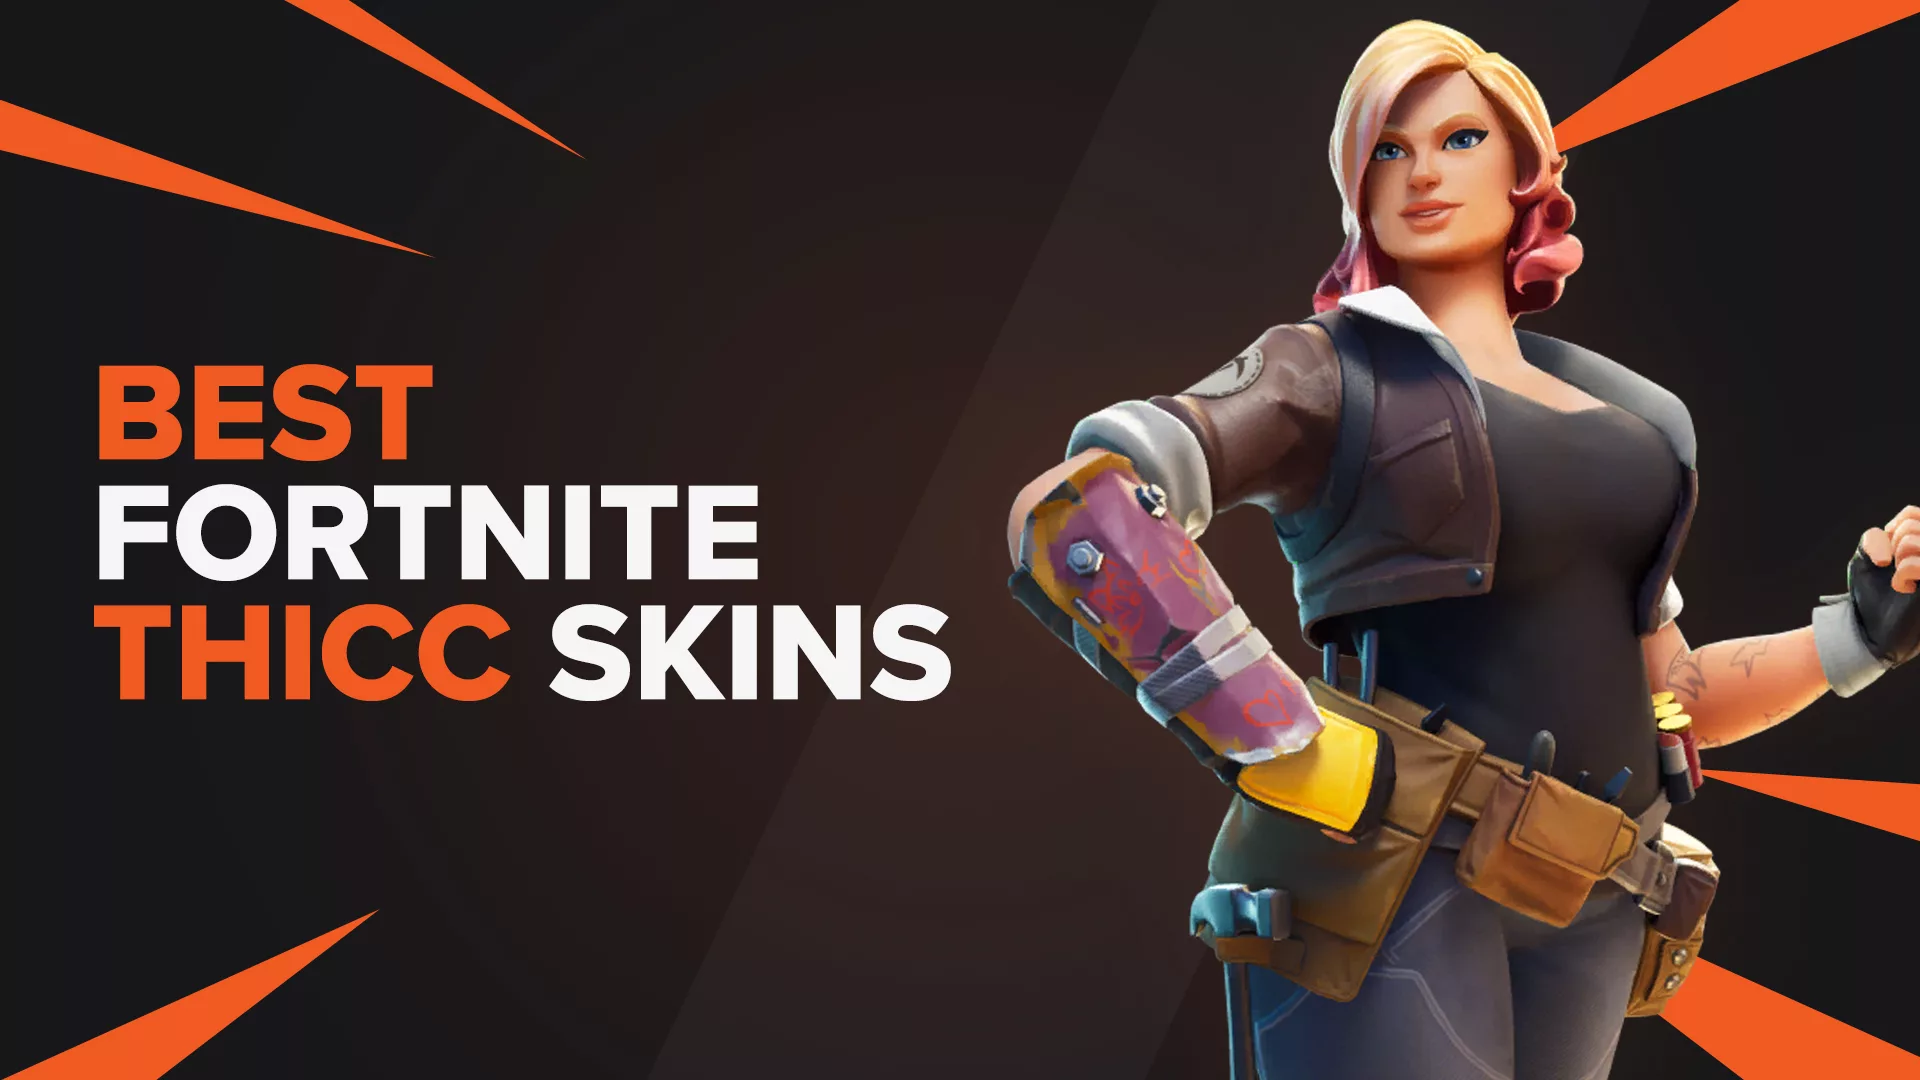 These 4 Are The Thiccest Fortnite Skins Ever Released!